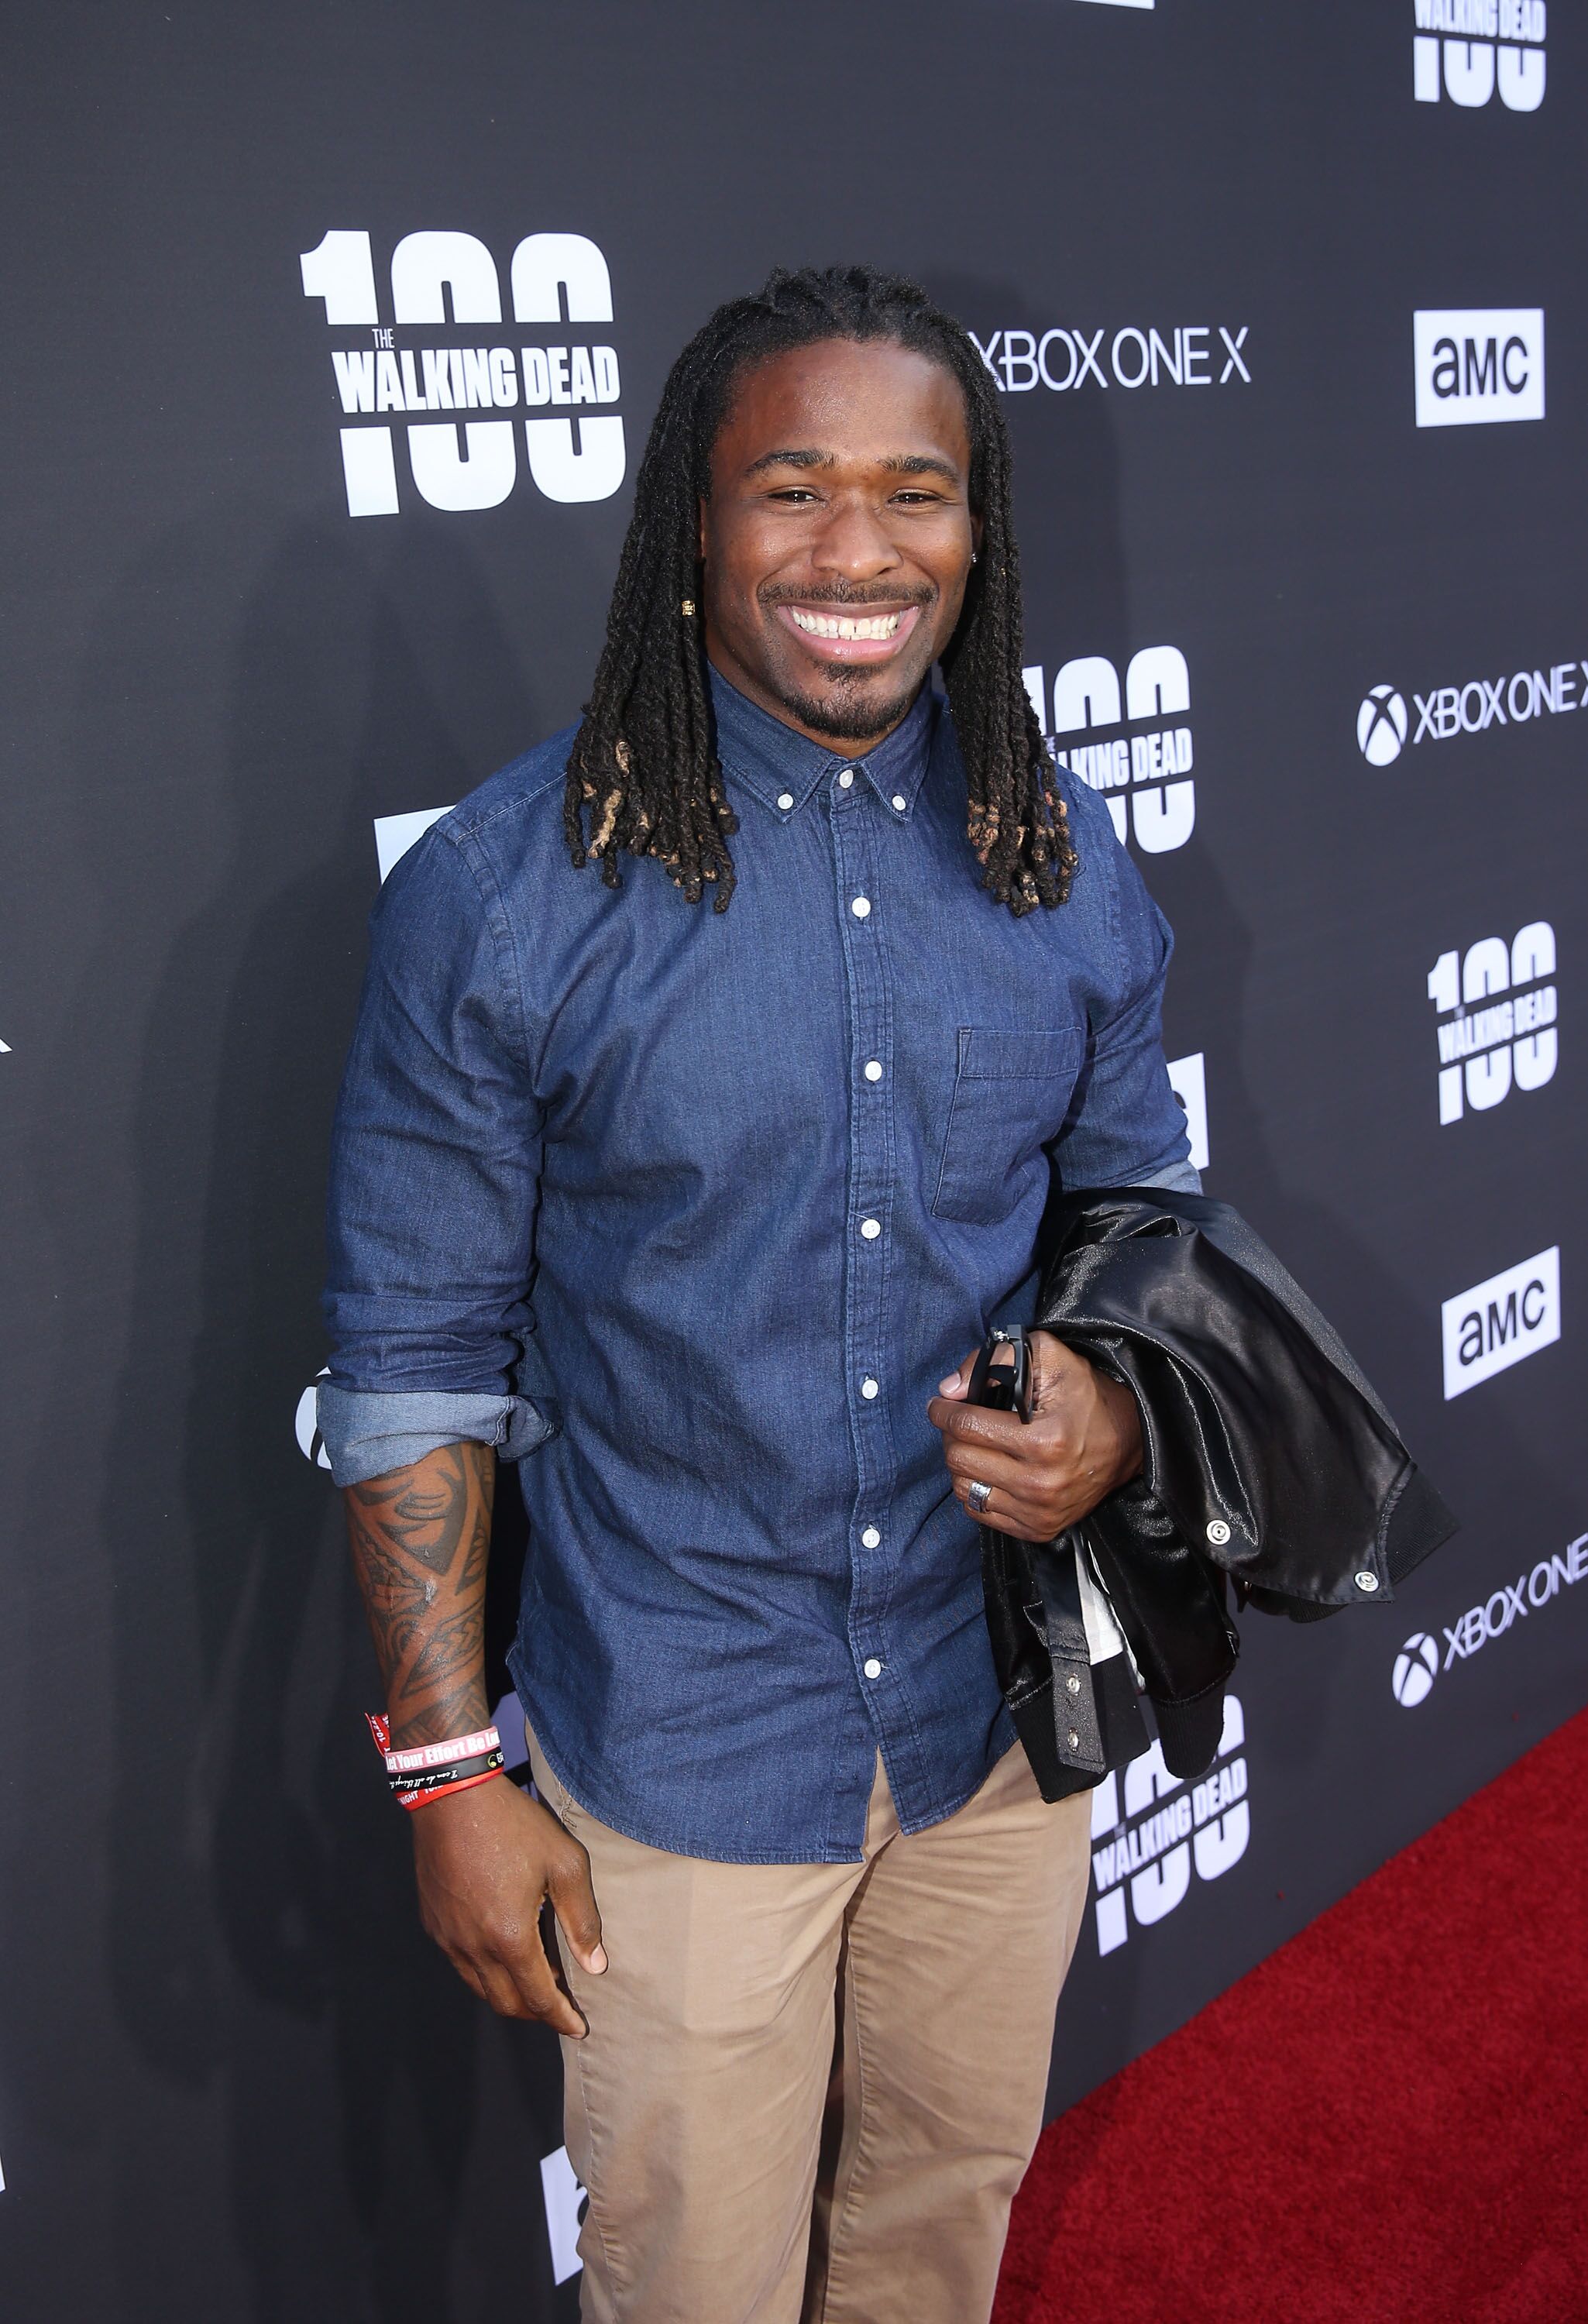 DeAngelo Williams arrives at The Walking Dead 100th Episode Premiere and Party | Source: Getty Images